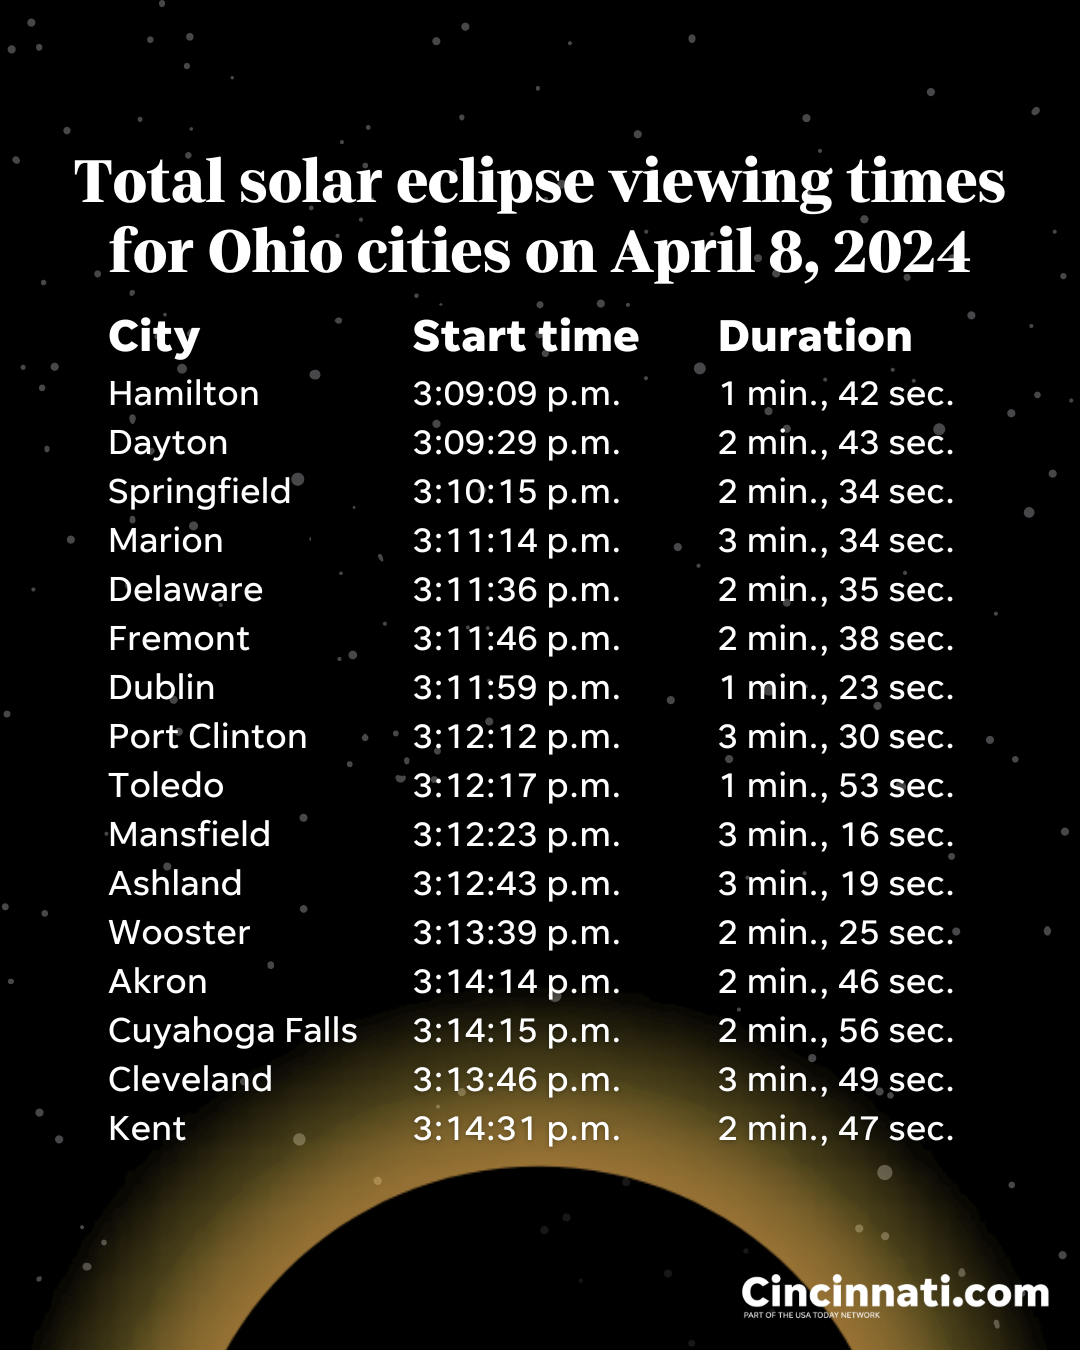 List of some of the Ohio cities that will experience the total solar eclipse in 2024.